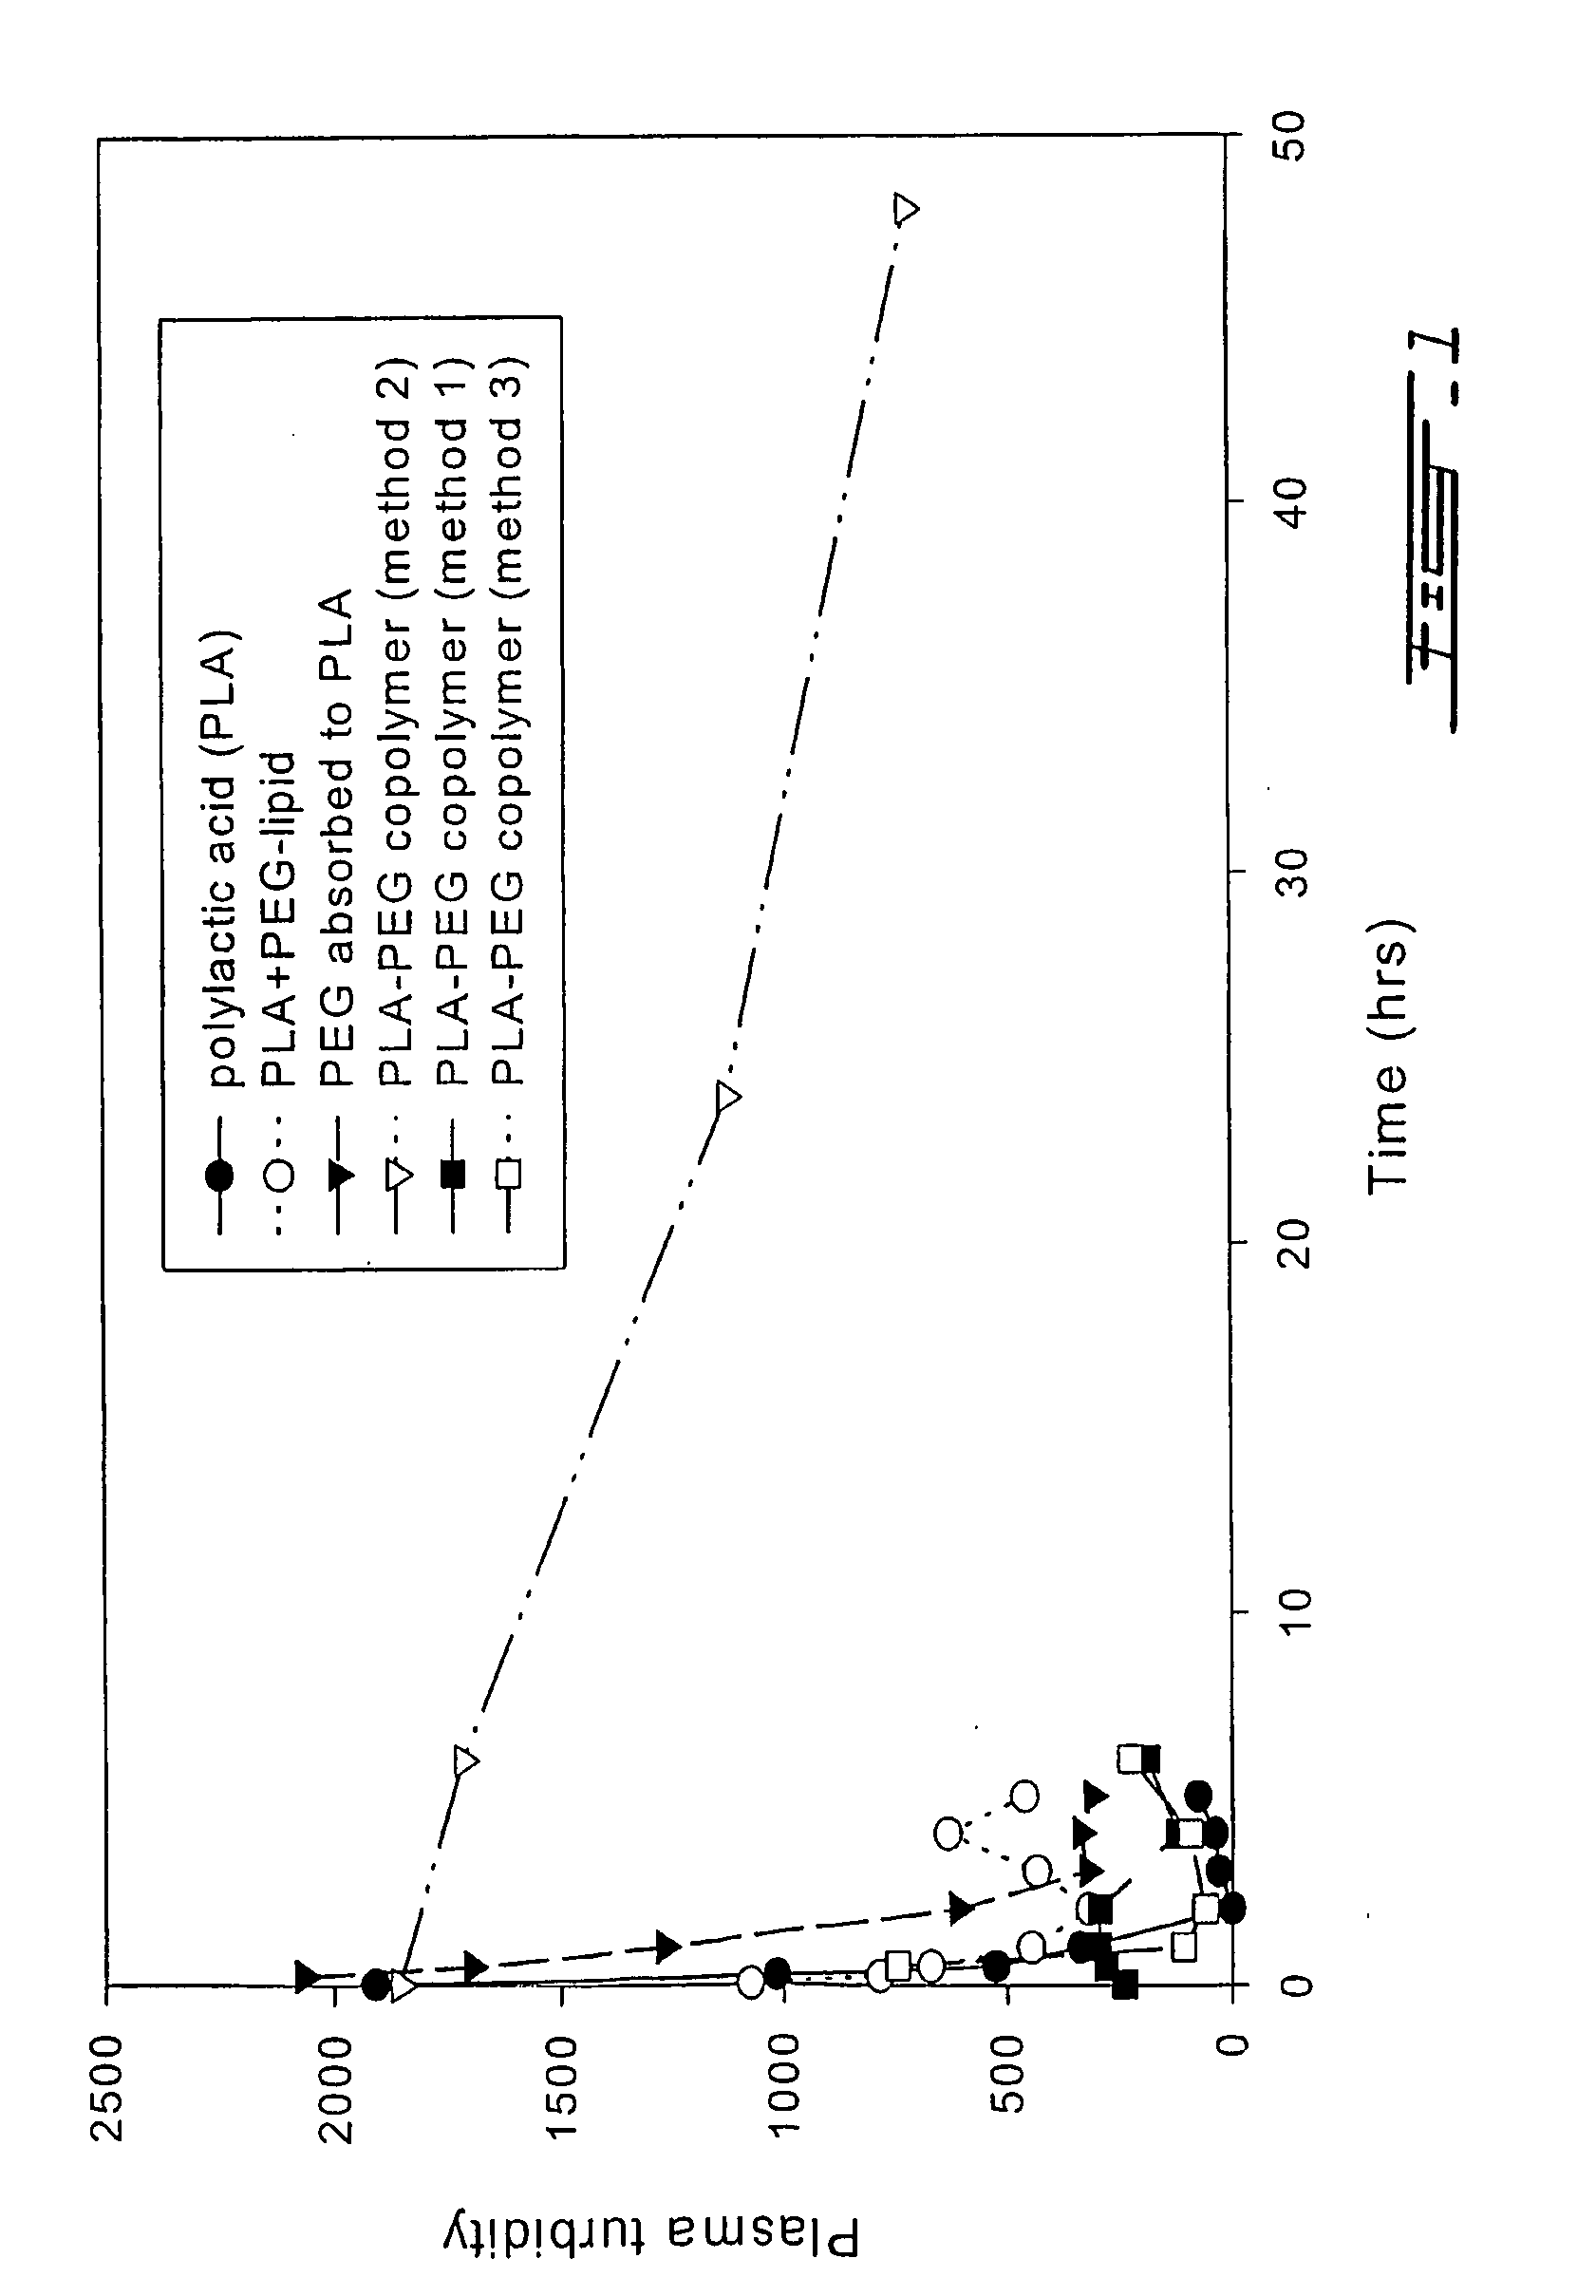 Biodegradable polymeric nanocapsules and uses thereof